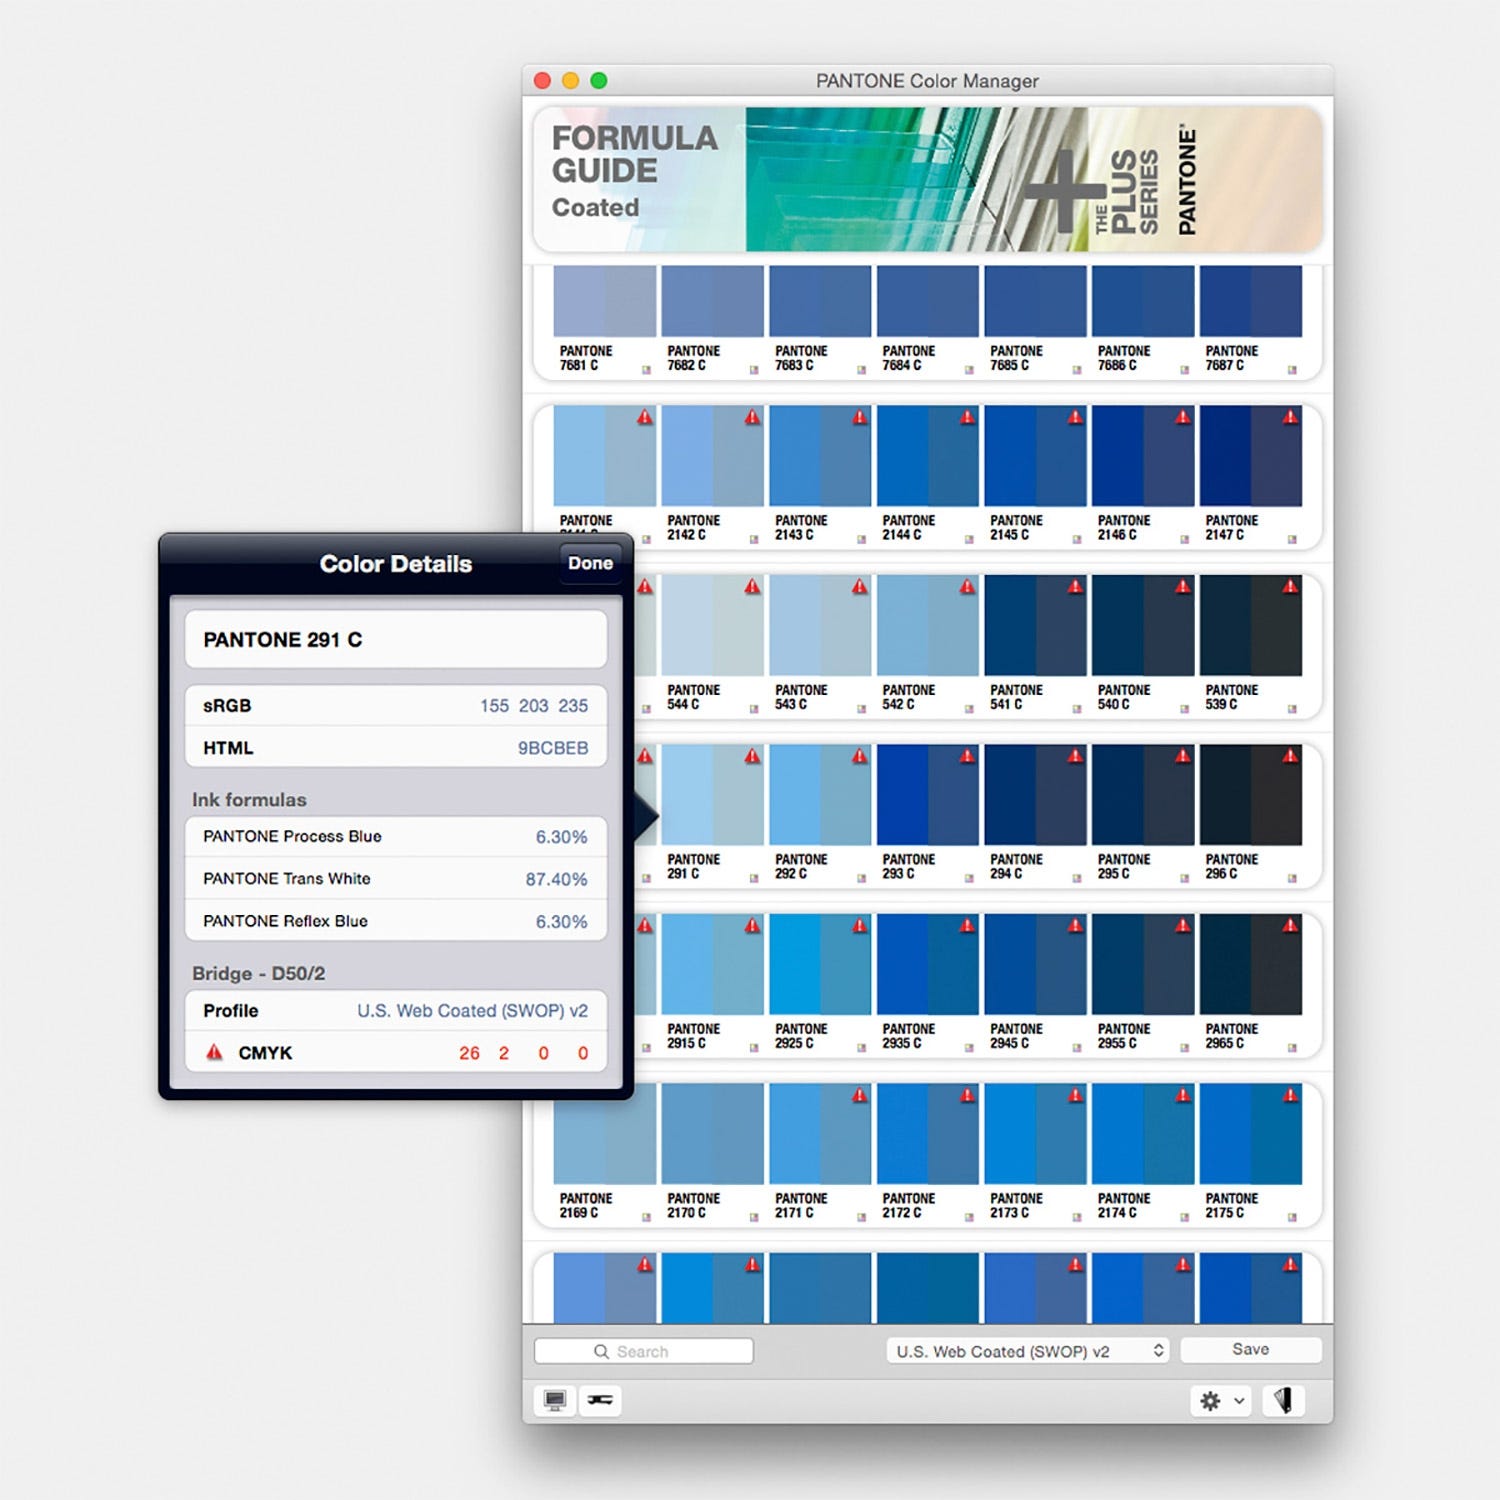 pantone color manager software free download for mac